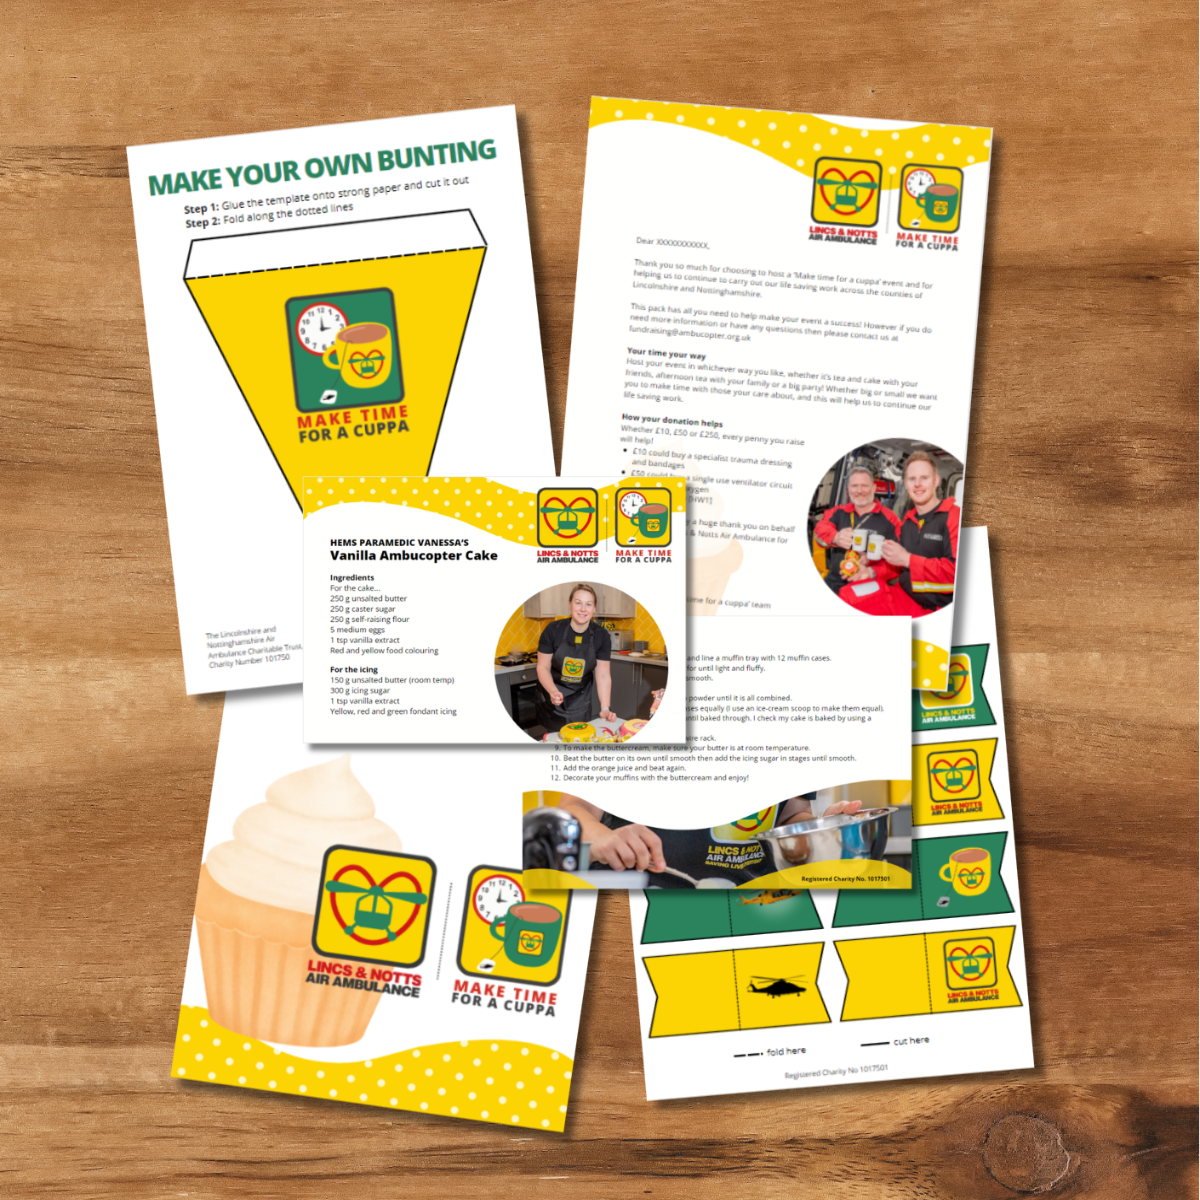 Make Time For A Cuppa Fundraising Pack